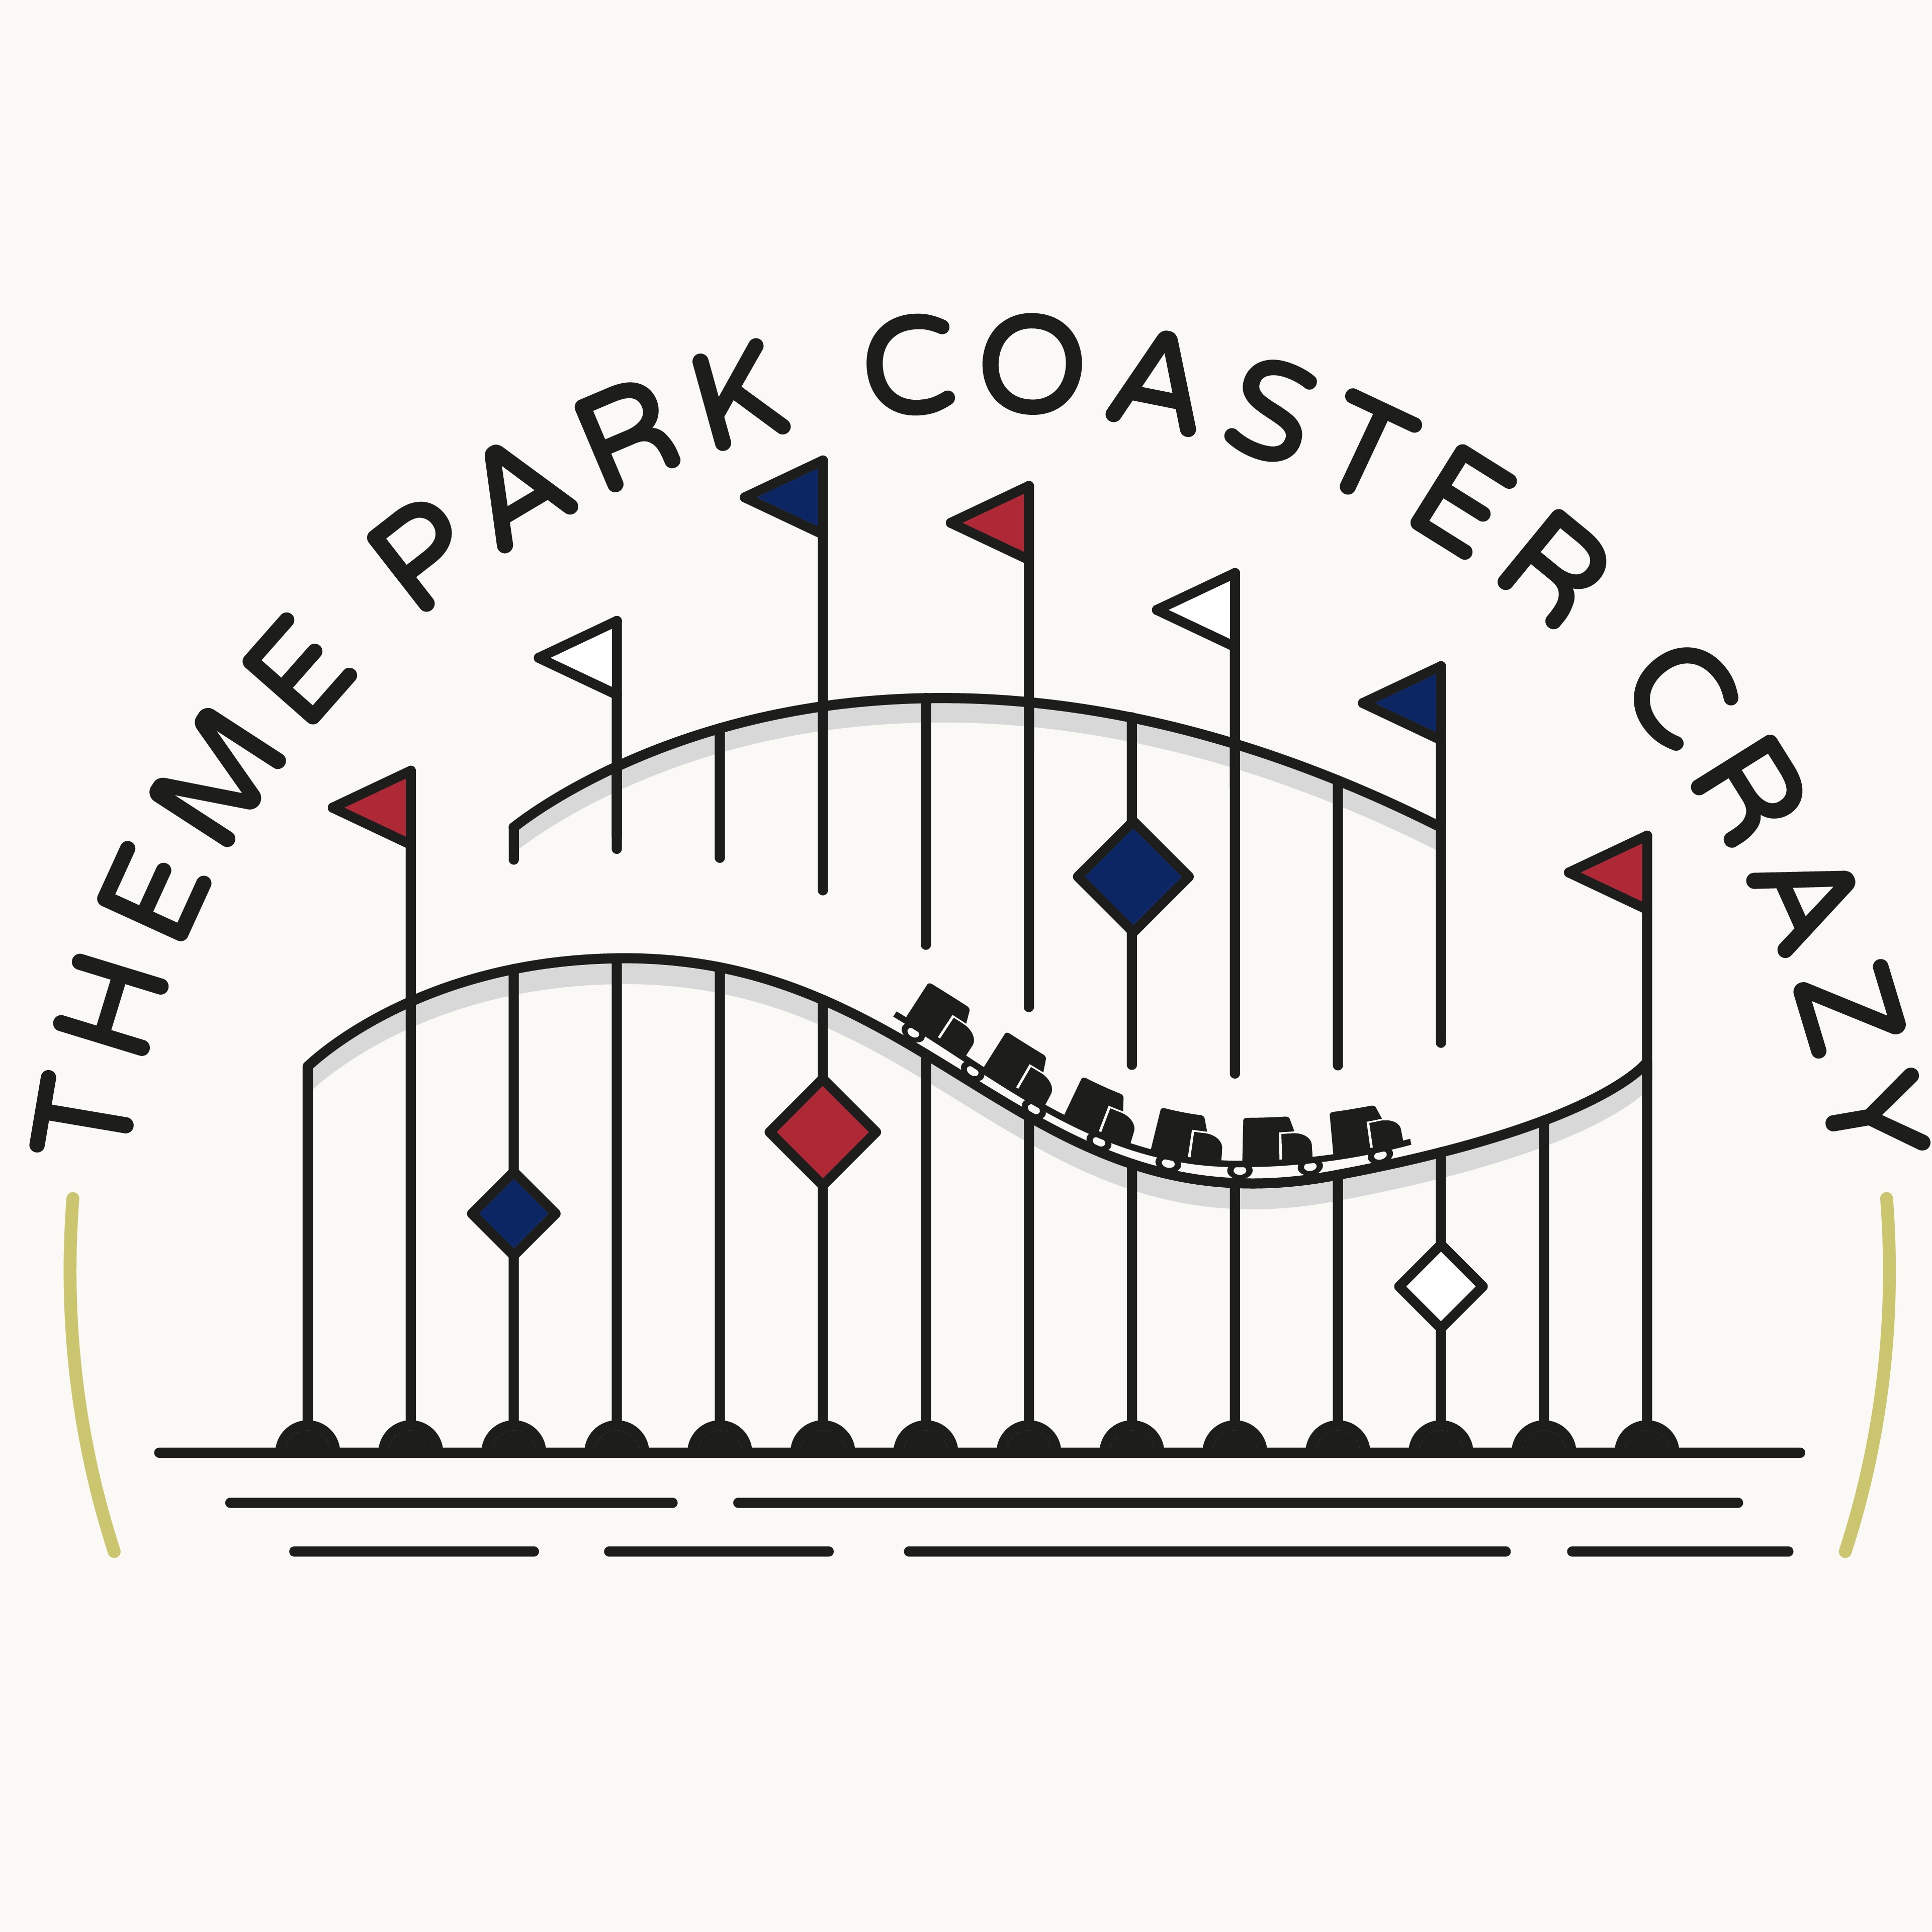 The Logo for this site has a coaster going over some hills with with red, white, and blue flags in the background.